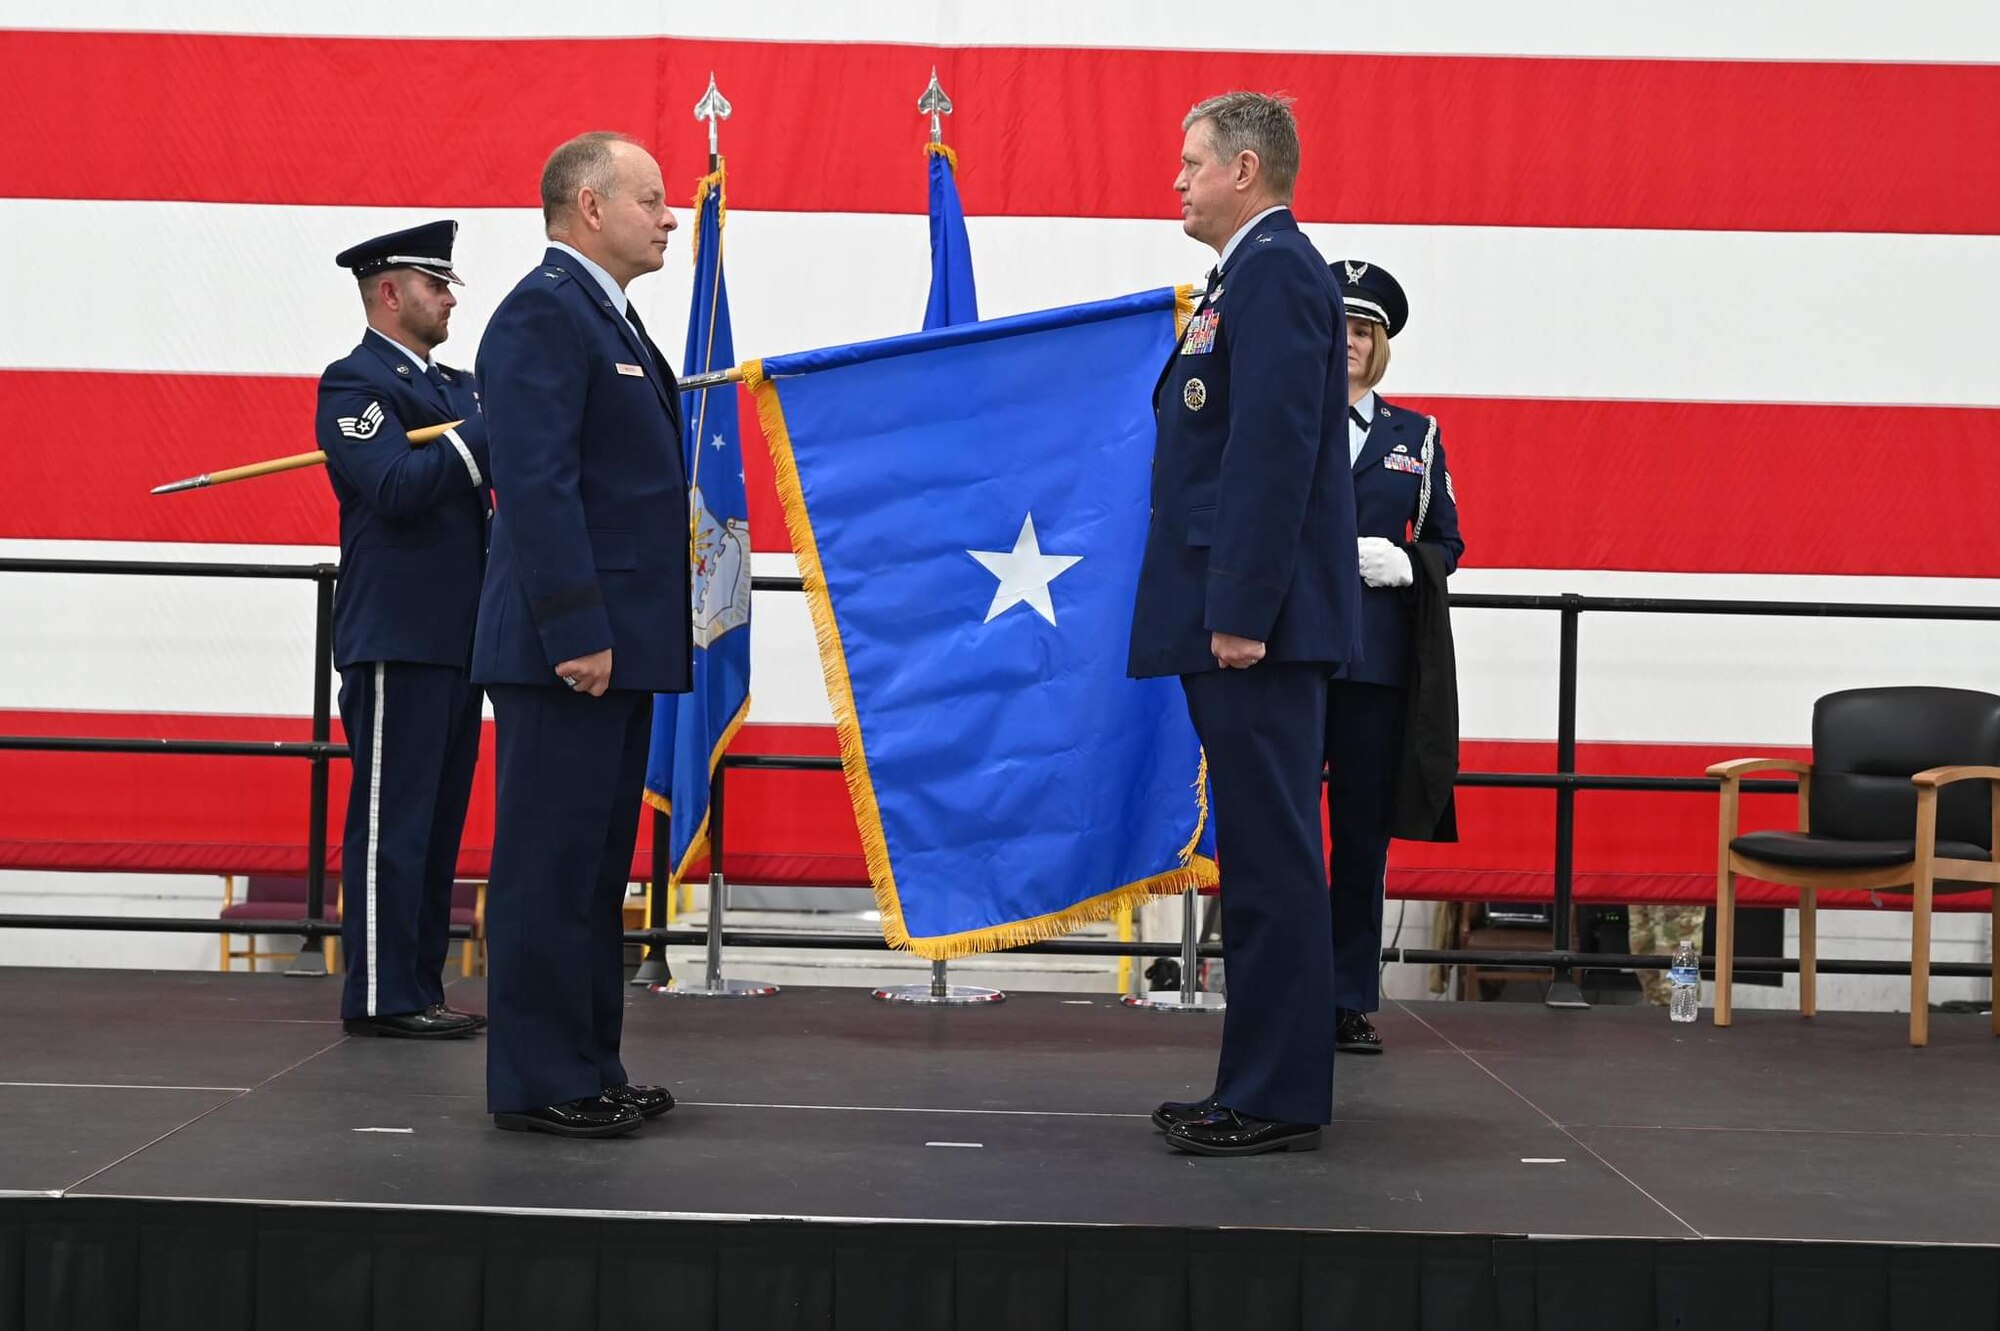 Two men in U.S. Air Force service dress face each other at attention in the foreground while a man in Air Force Honor Guard uniform holds a blue flag with a single white star unfurled in the background.